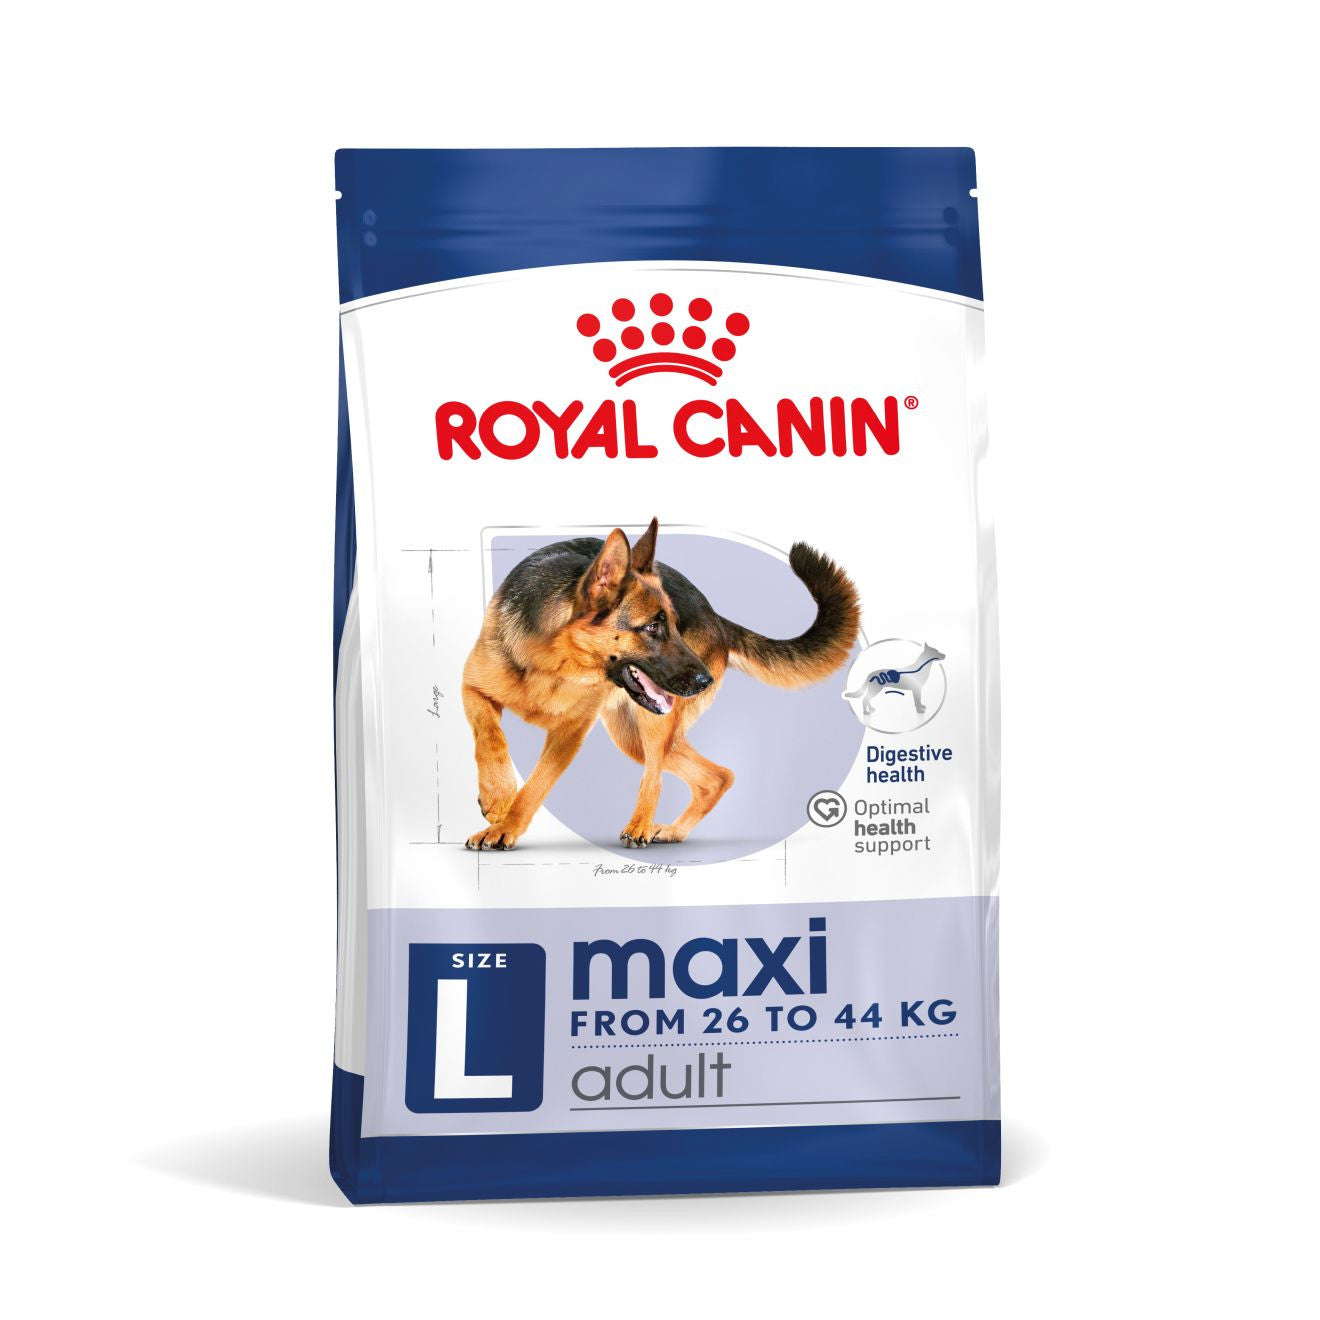 Royal Canin Maxi Adult Dry Dog Food - All Sizes